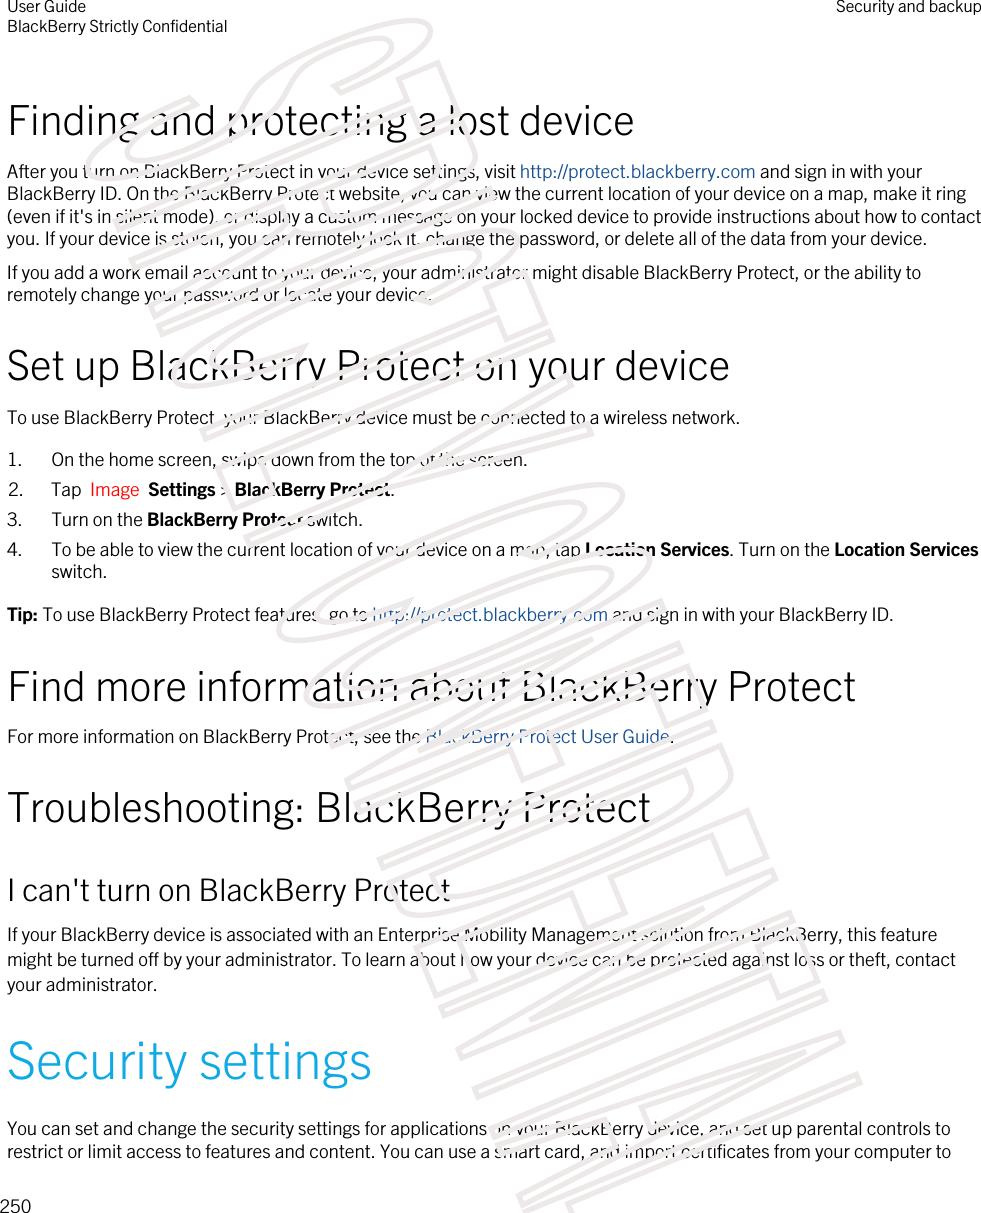 Finding and protecting a lost deviceAfter you turn on BlackBerry Protect in your device settings, visit http://protect.blackberry.com and sign in with your BlackBerry ID. On the BlackBerry Protect website, you can view the current location of your device on a map, make it ring (even if it&apos;s in silent mode), or display a custom message on your locked device to provide instructions about how to contact you. If your device is stolen, you can remotely lock it, change the password, or delete all of the data from your device.If you add a work email account to your device, your administrator might disable BlackBerry Protect, or the ability to remotely change your password or locate your device.Set up BlackBerry Protect on your deviceTo use BlackBerry Protect, your BlackBerry device must be connected to a wireless network.1. On the home screen, swipe down from the top of the screen.2. Tap  Image  Settings &gt; BlackBerry Protect.3. Turn on the BlackBerry Protect switch.4. To be able to view the current location of your device on a map, tap Location Services. Turn on the Location Services switch.Tip: To use BlackBerry Protect features, go to http://protect.blackberry.com and sign in with your BlackBerry ID.Find more information about BlackBerry ProtectFor more information on BlackBerry Protect, see the BlackBerry Protect User Guide.Troubleshooting: BlackBerry ProtectI can&apos;t turn on BlackBerry ProtectIf your BlackBerry device is associated with an Enterprise Mobility Management solution from BlackBerry, this feature might be turned off by your administrator. To learn about how your device can be protected against loss or theft, contact your administrator.Security settingsYou can set and change the security settings for applications on your BlackBerry device, and set up parental controls to restrict or limit access to features and content. You can use a smart card, and import certificates from your computer to User GuideBlackBerry Strictly ConfidentialSecurity and backup250STRICTLY CONFIDENTIAL